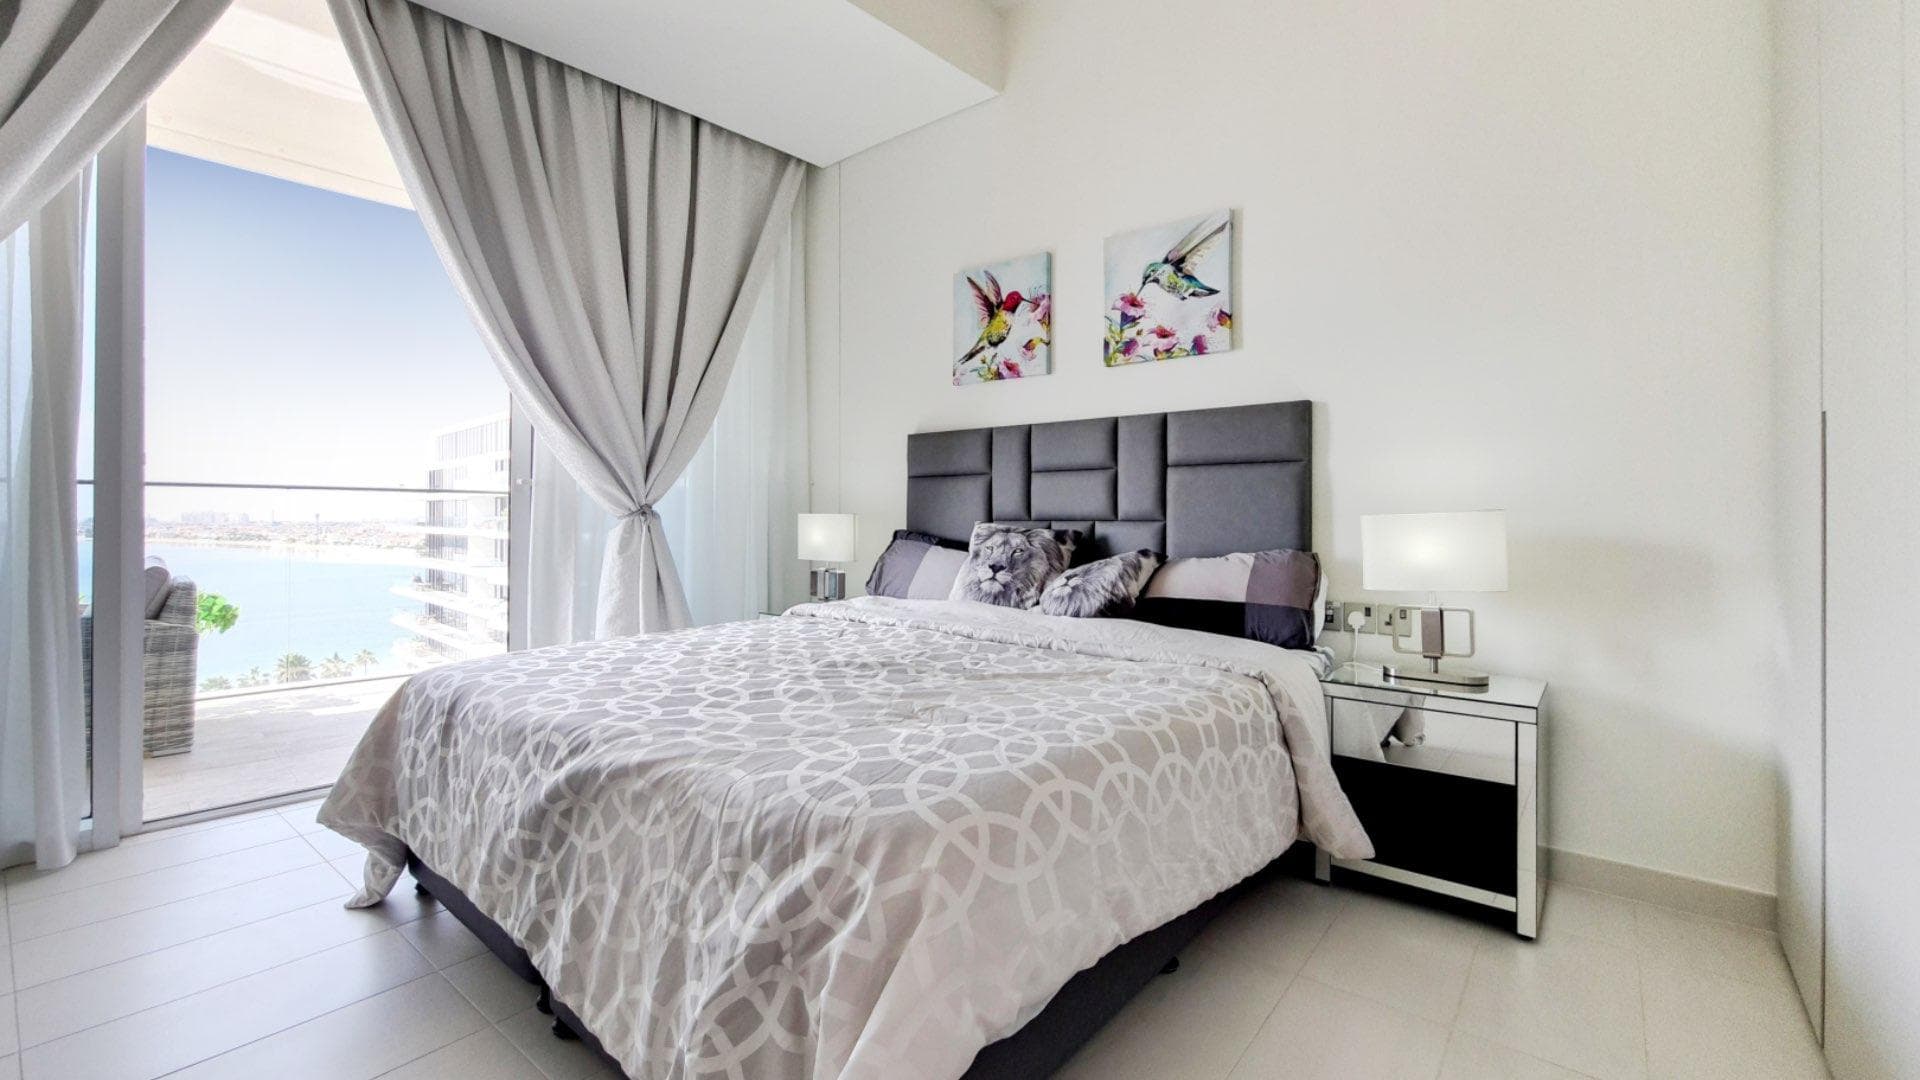 2 Bedroom Apartment For Sale Serenia Residences The Palm Lp34724 18656a8f7f96cf00.jpg